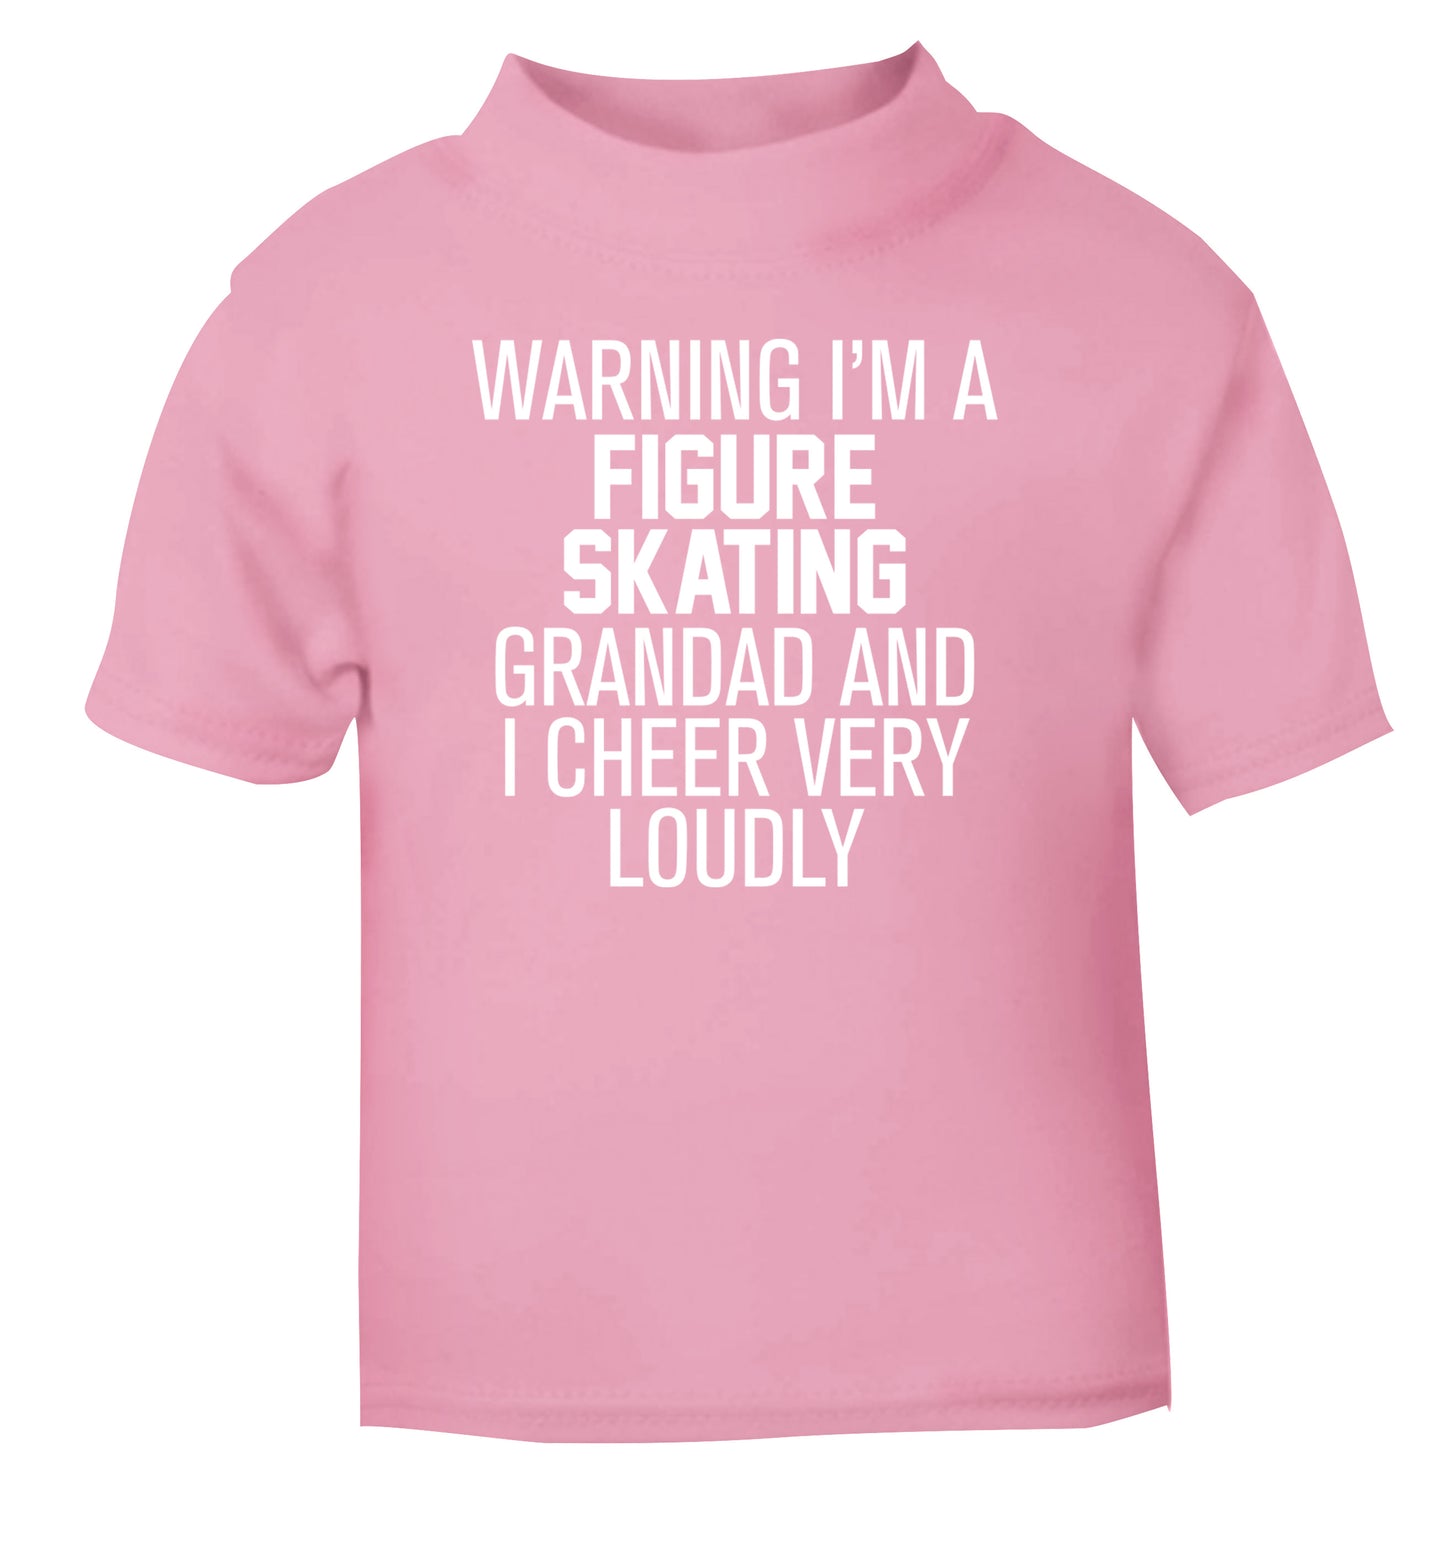 Warning I'm a figure skating grandad and I cheer very loudly light pink Baby Toddler Tshirt 2 Years